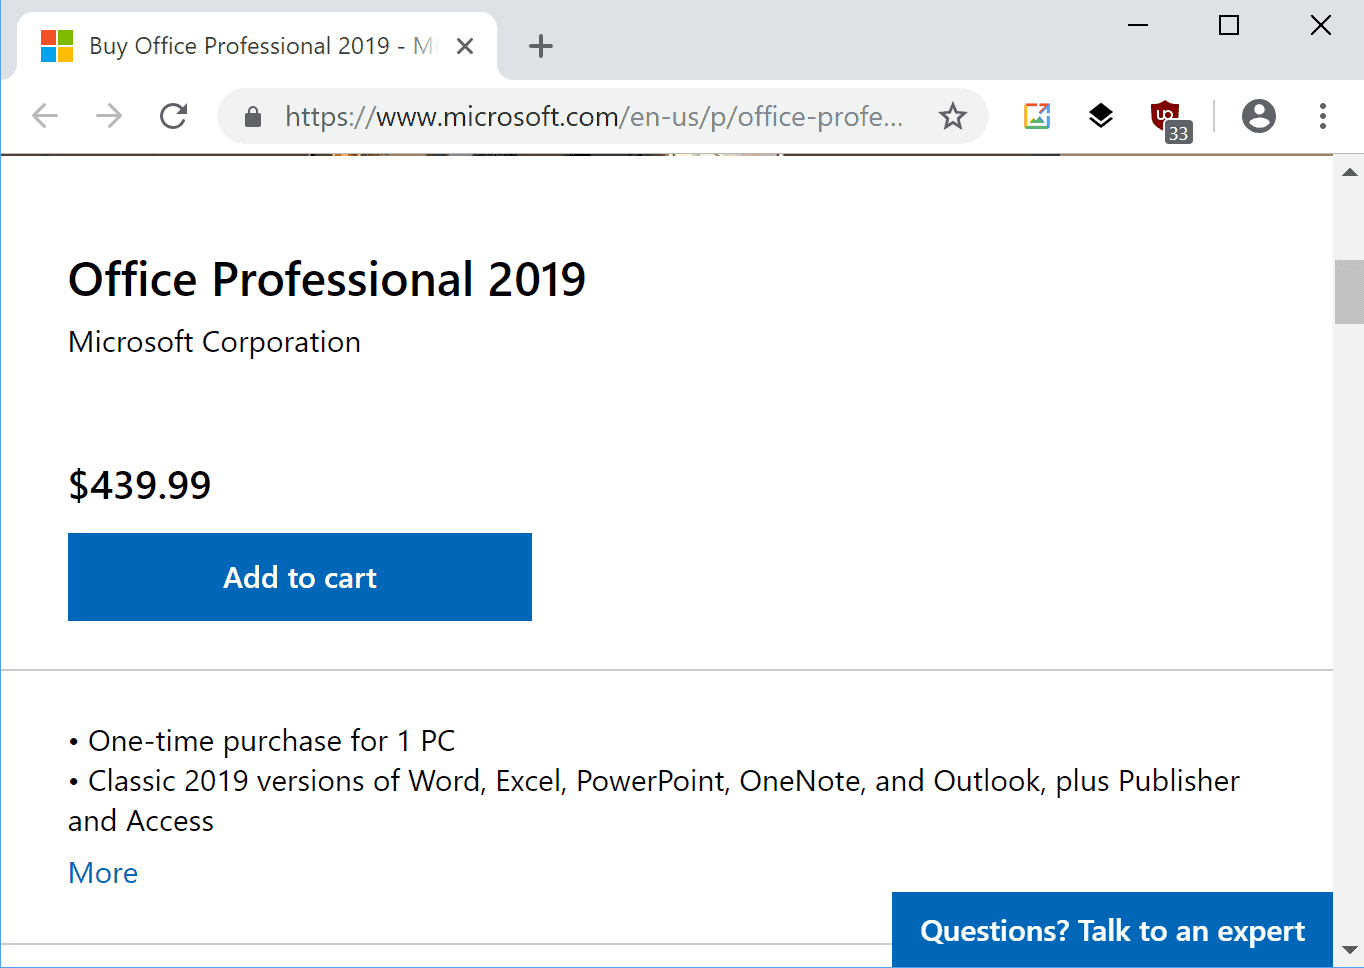 Microsoft wants $439 for Office 2019 Professional